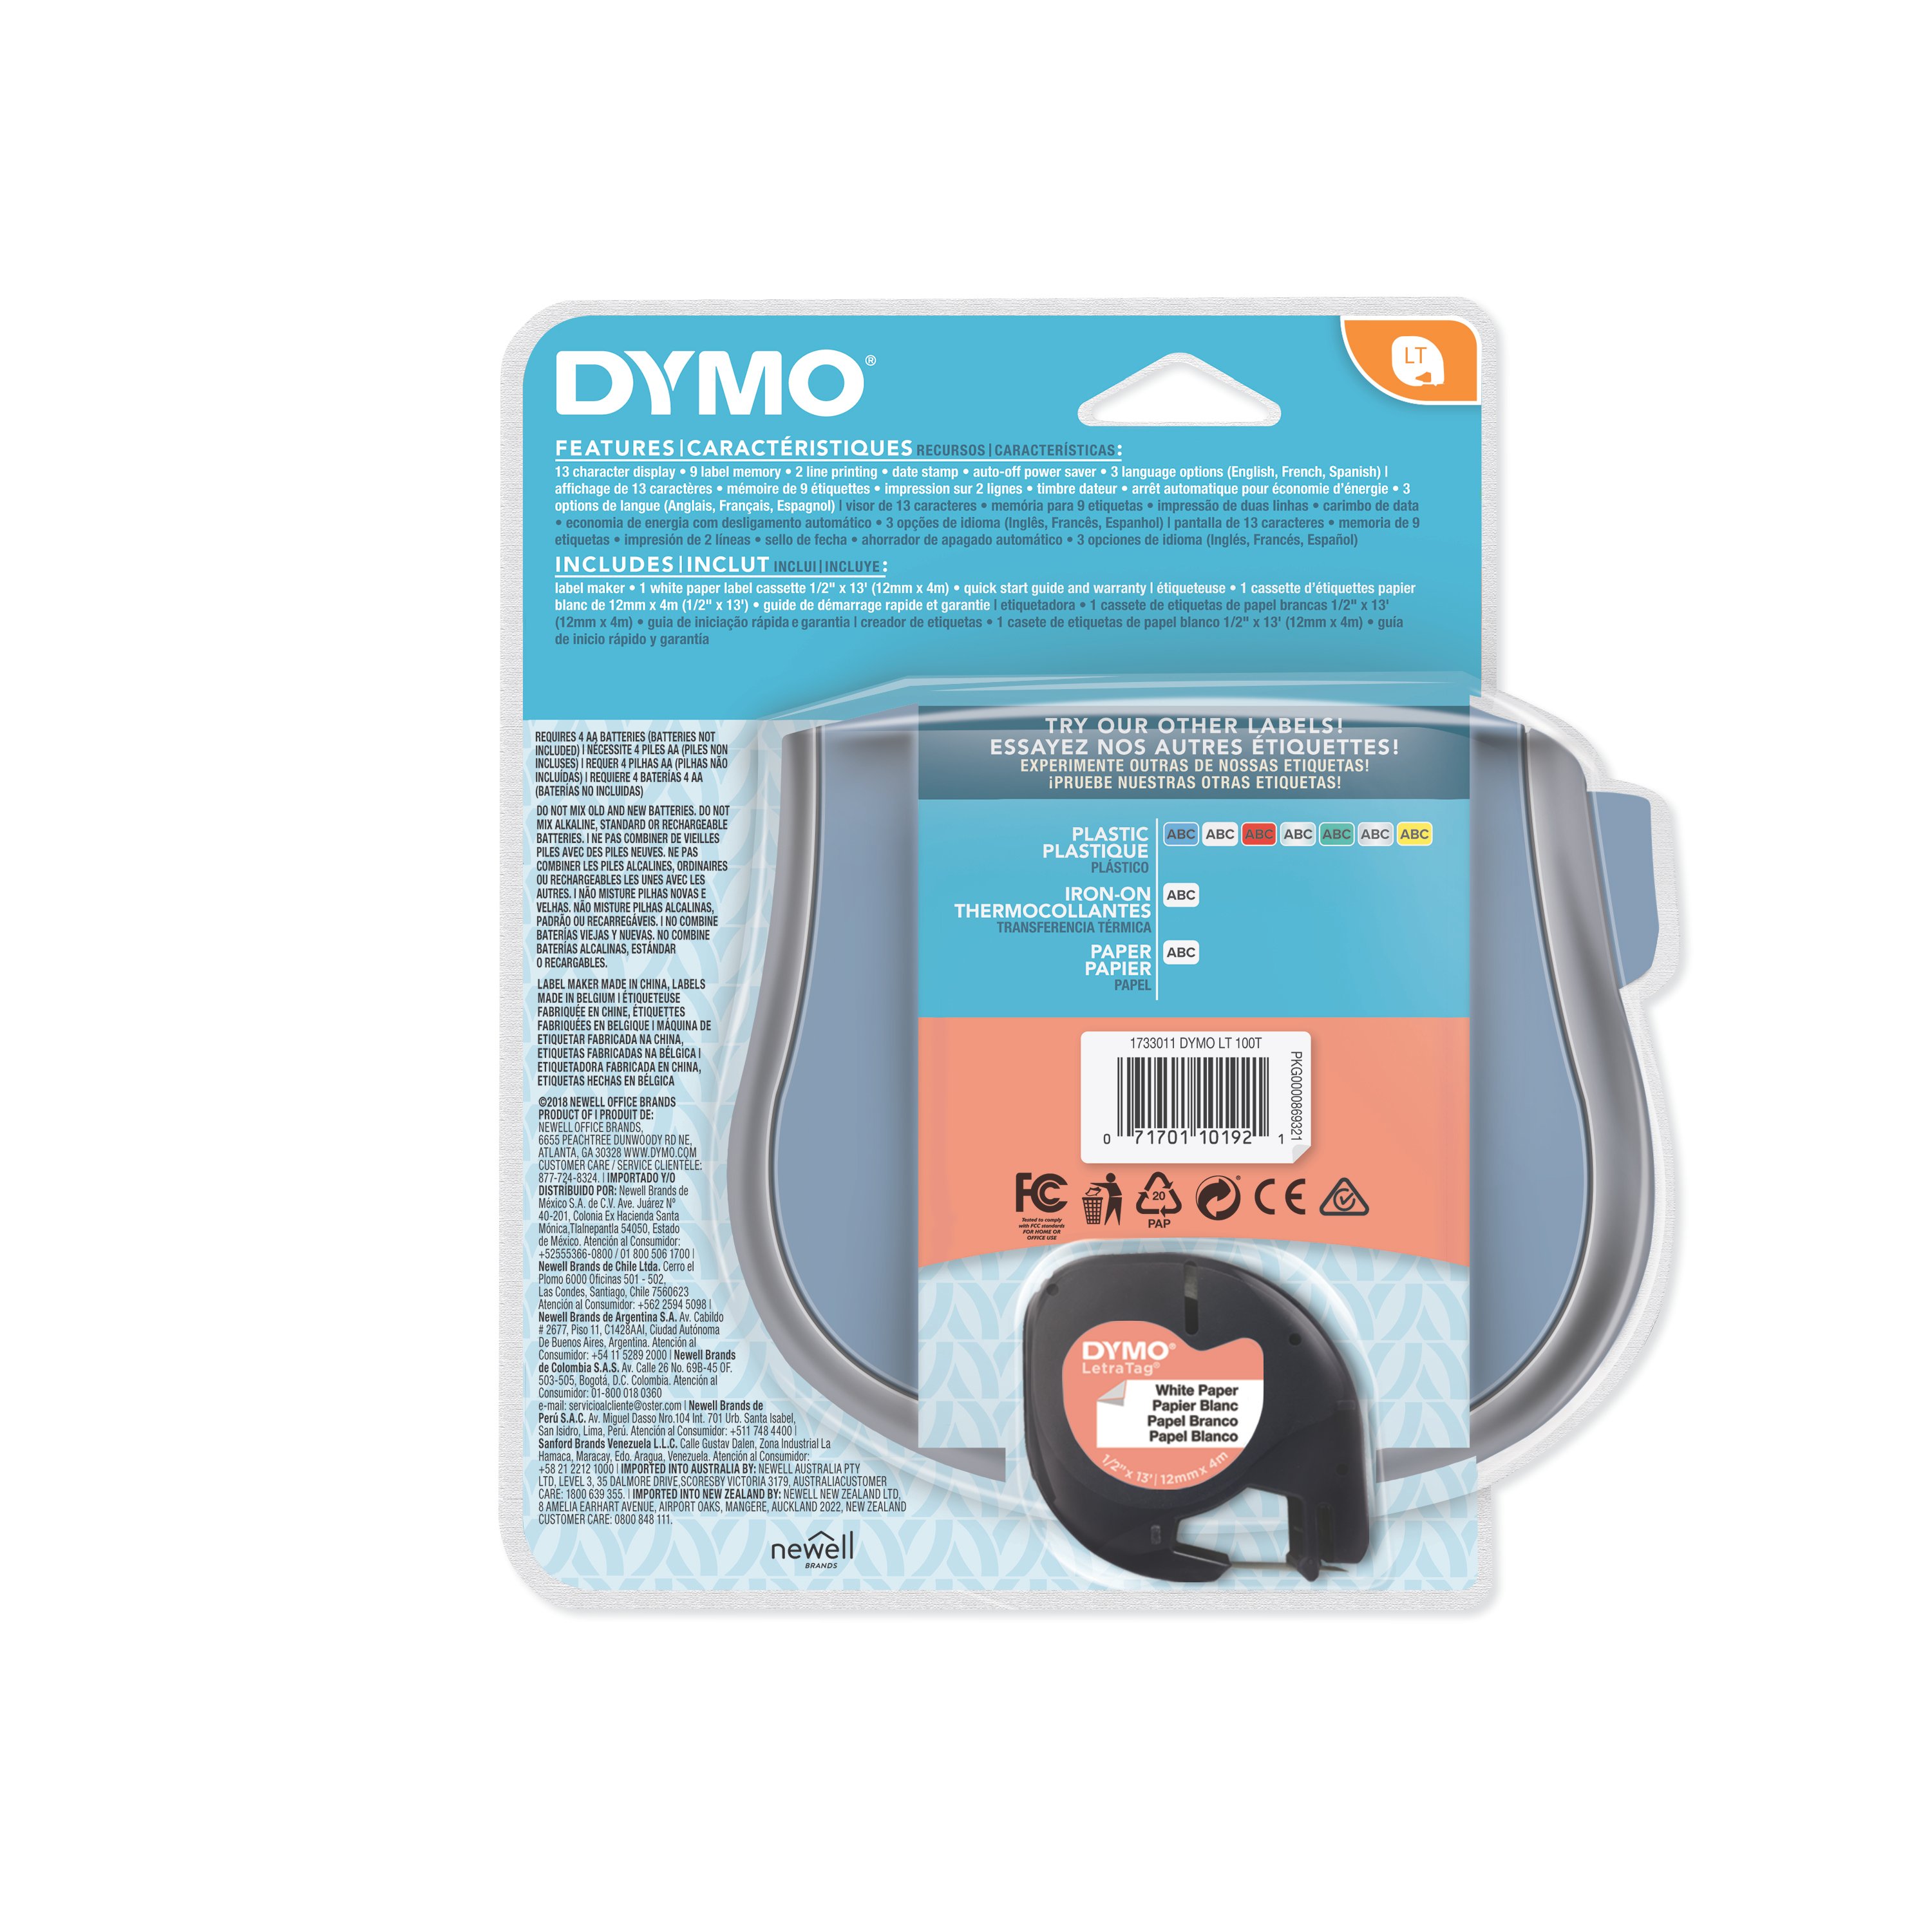 DYMO LetraTag LT-100T Portable Personal Label Maker Tested Works Free  Shipping